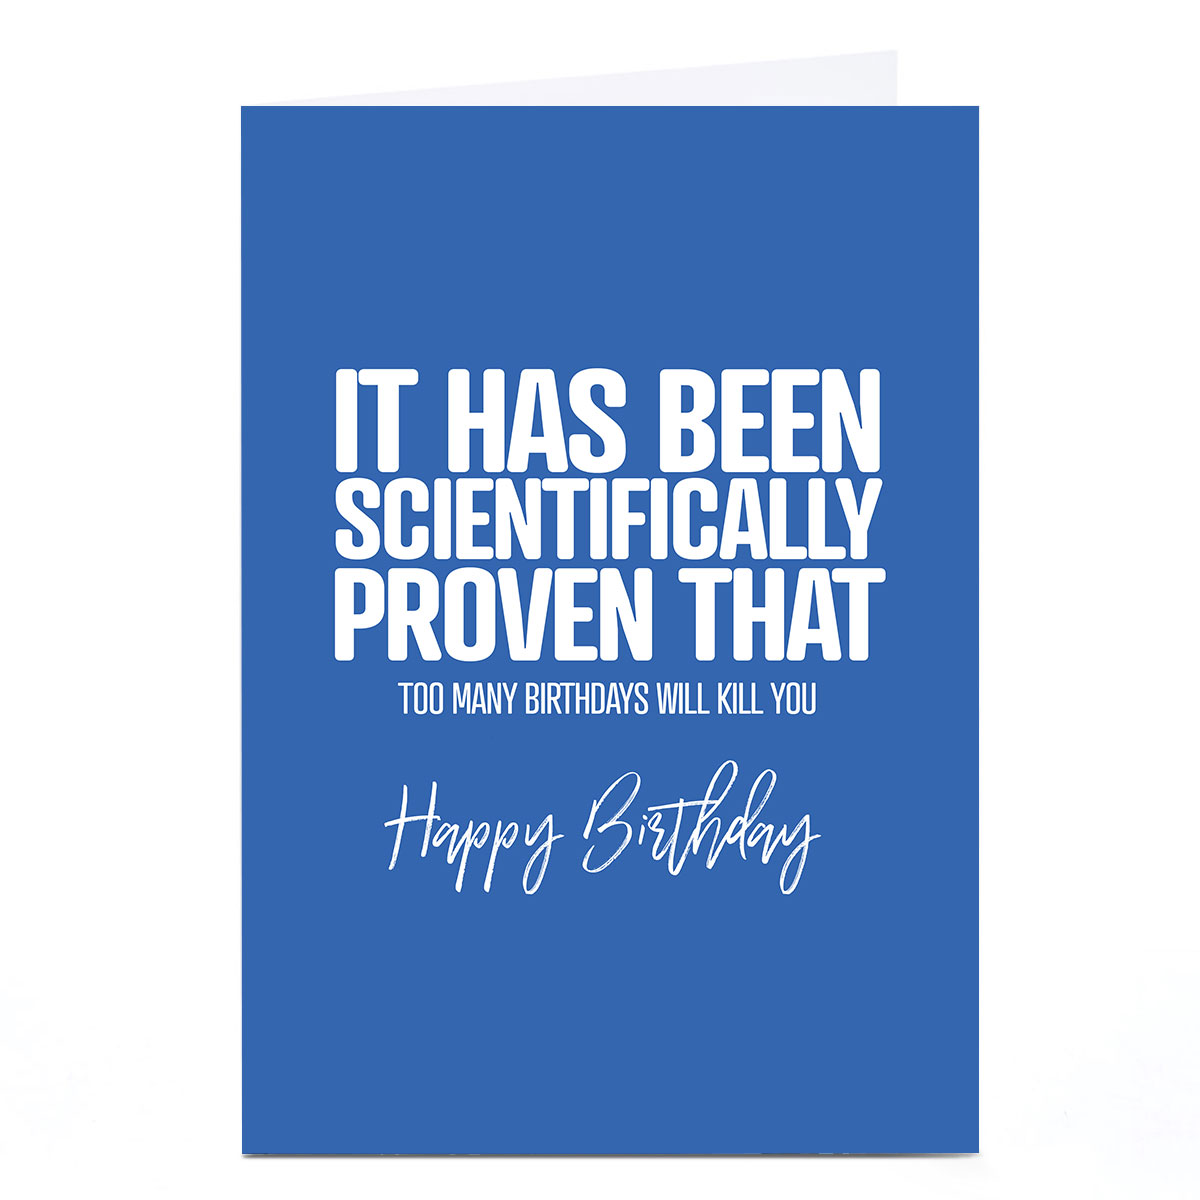 Personalised Punk Birthday Card - Scientifically Proven